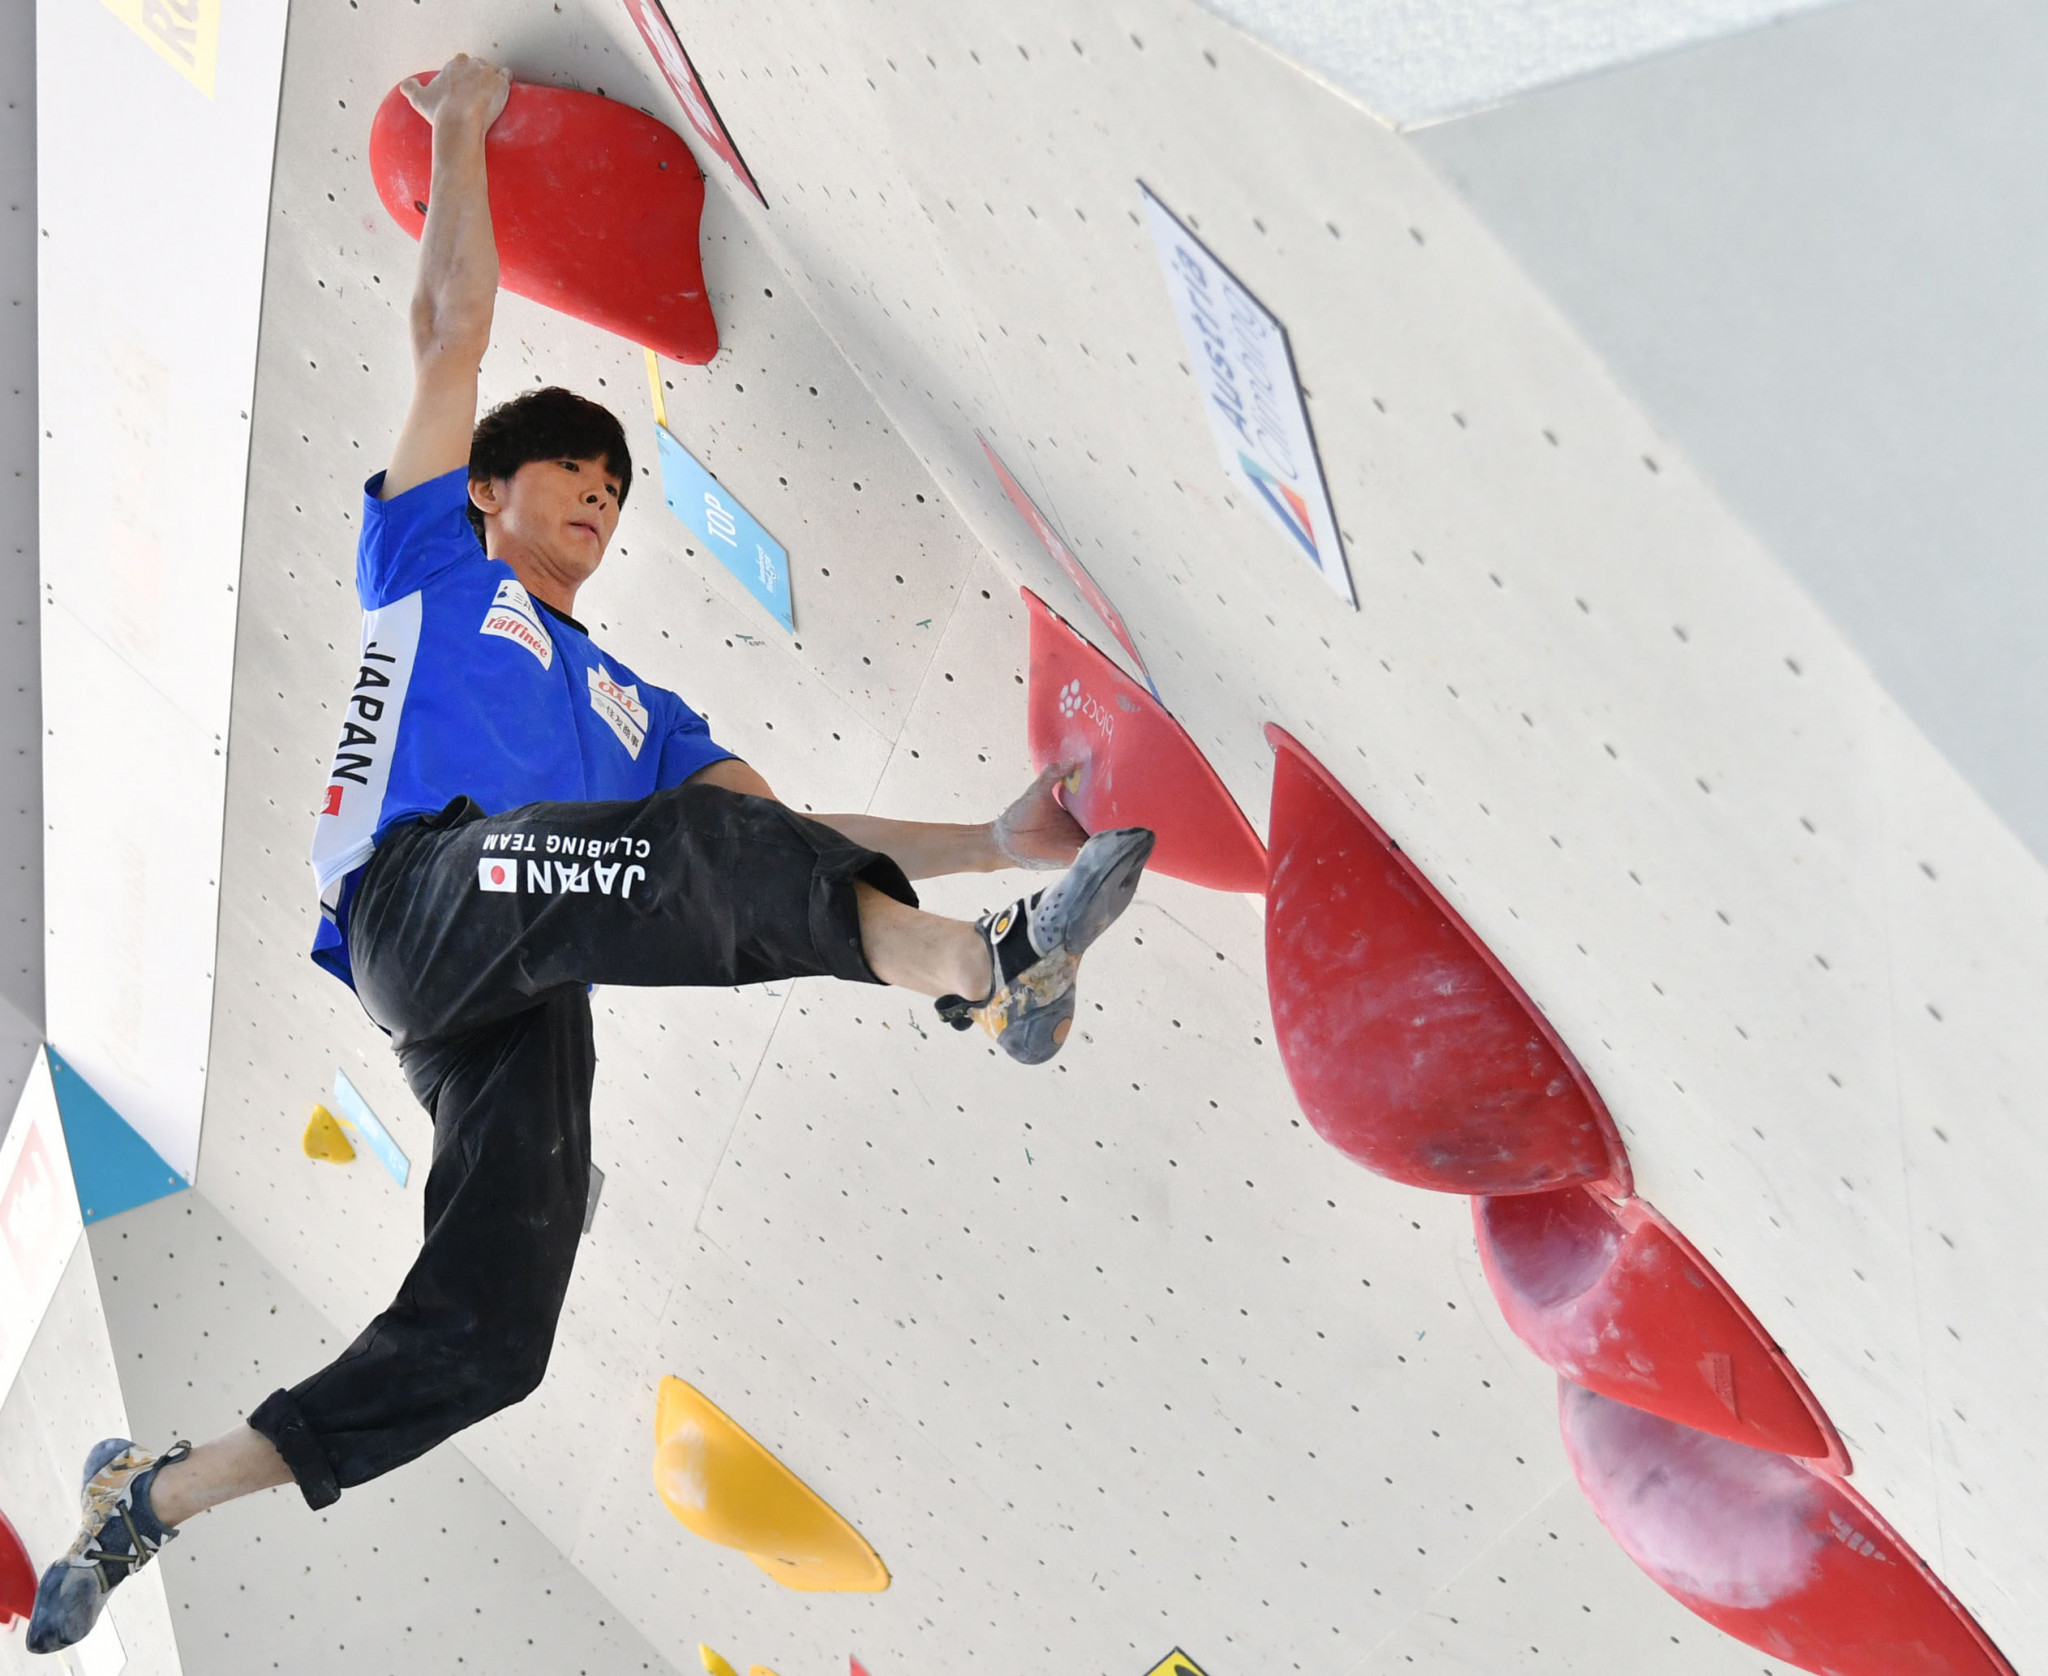 Tomoa Narasaki of Japan overtook Czech climber Adam Ondra to clinch the International Federation of Sports Climbing Bouldering World Cup in the United States ©Getty Images